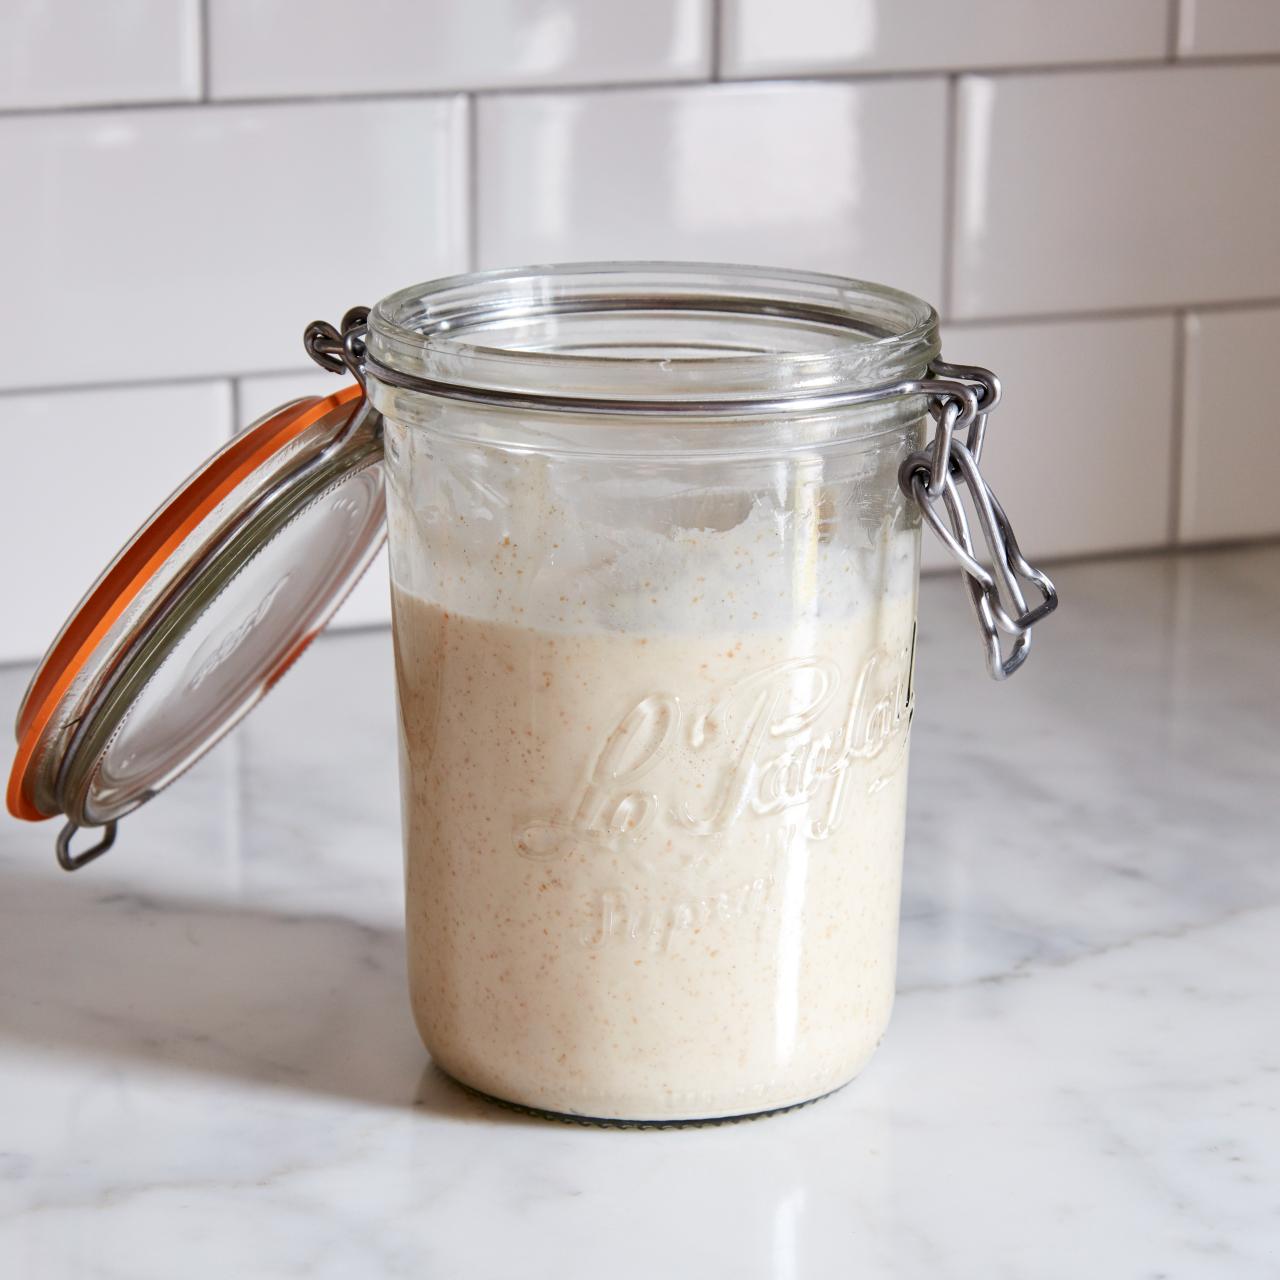 How to Make Sourdough Starter From Scratch